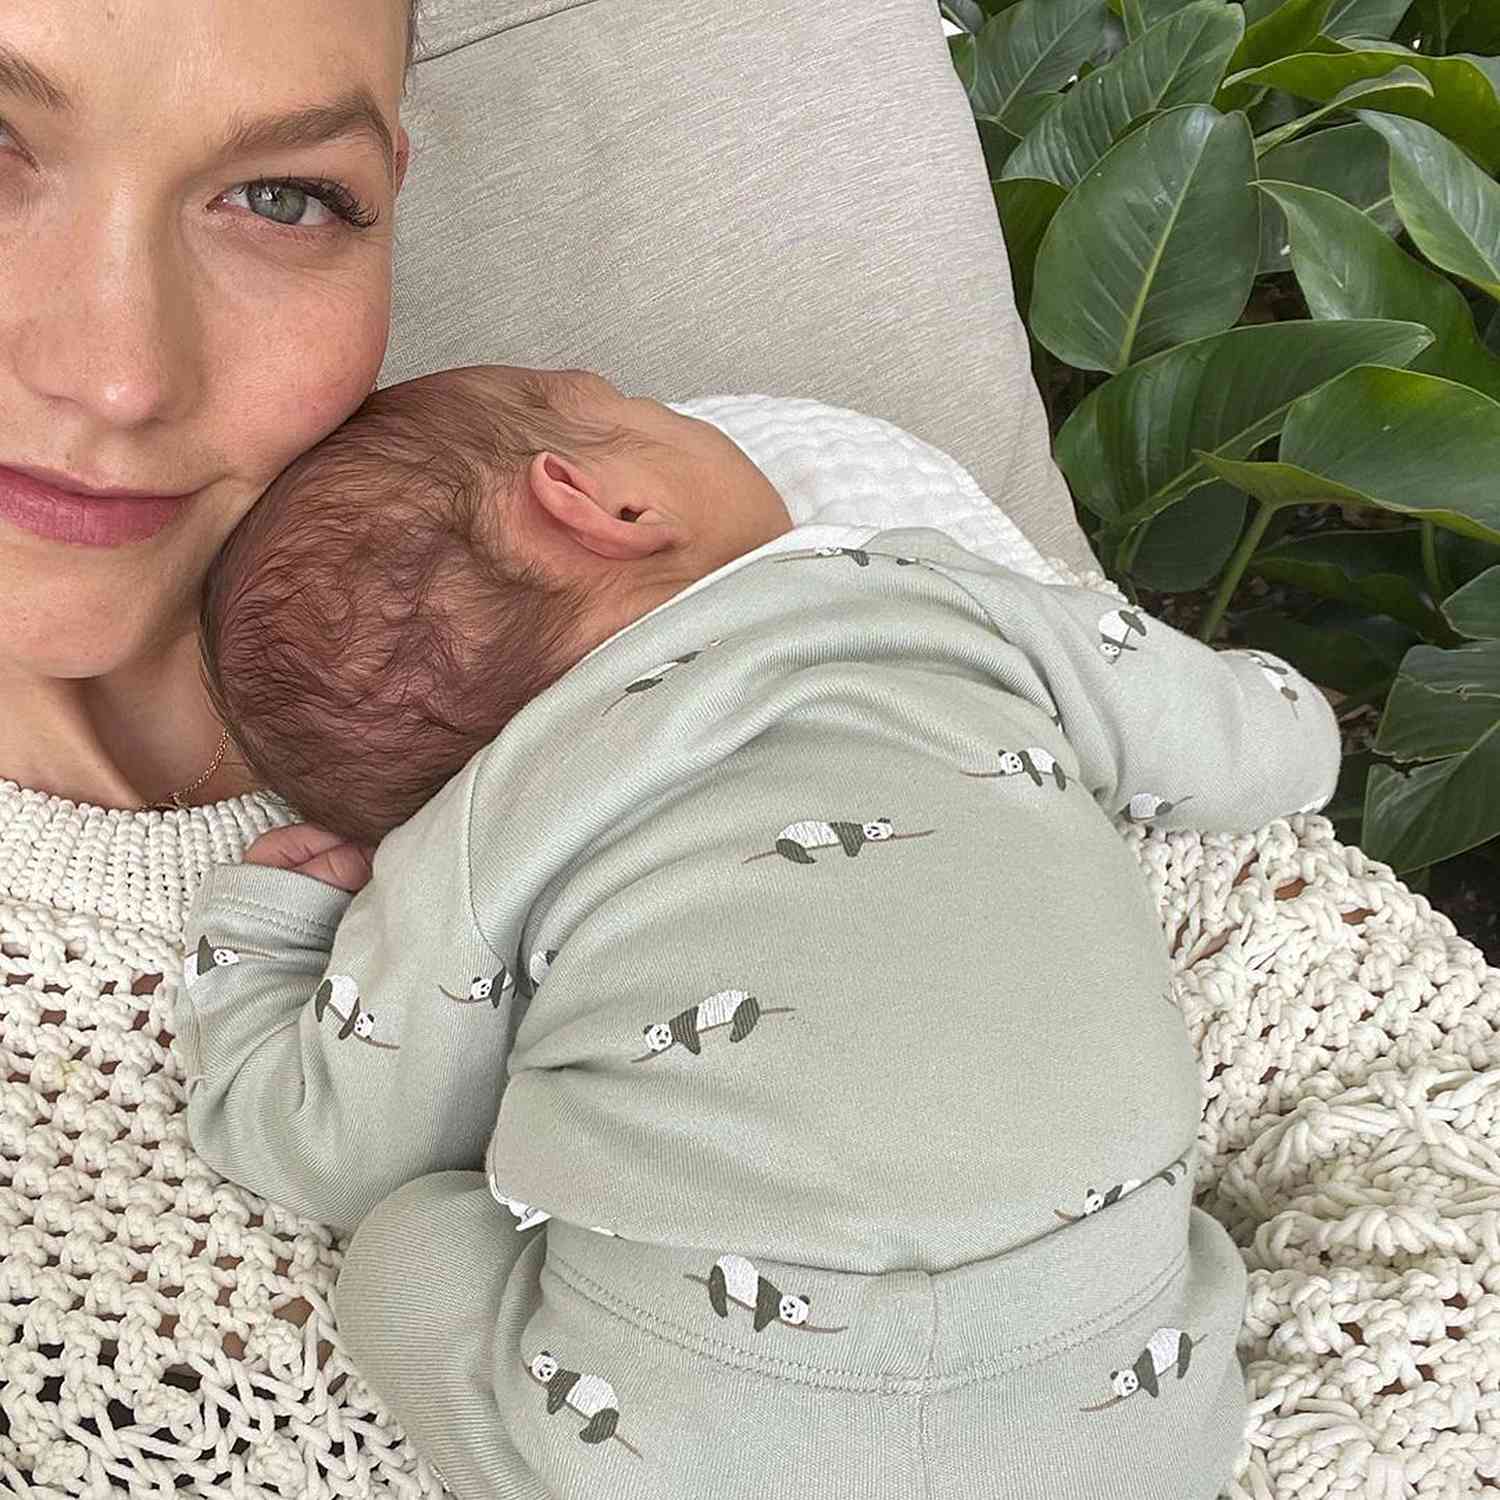 Karlie Kloss Says Motherhood Is the ‘Greatest Joy’ as Son Levi Turns 1: ‘Everything Changes’